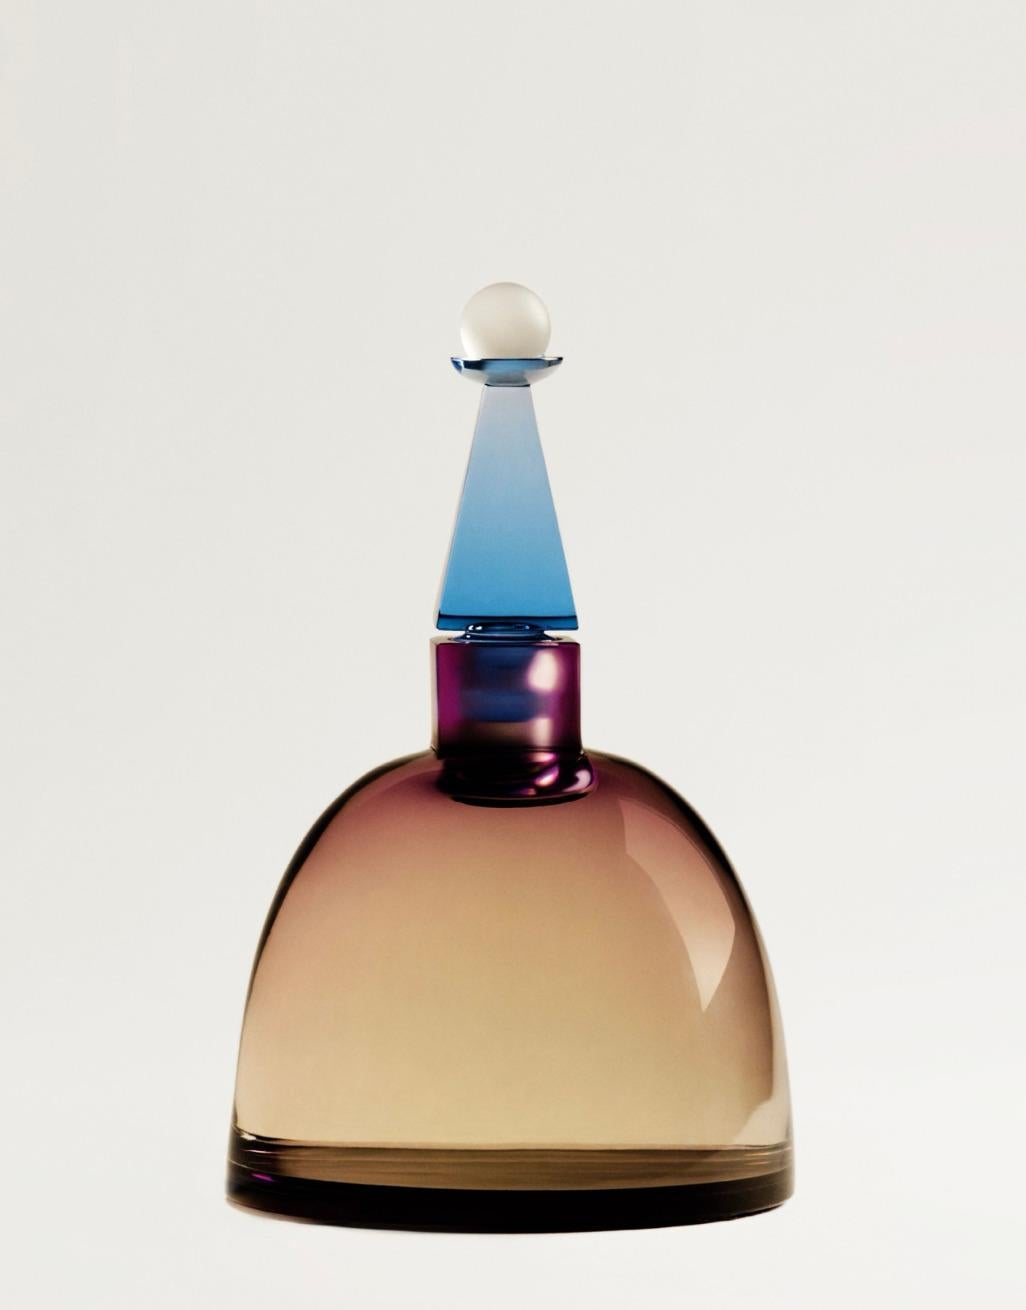 James Turrell Abstract Sculpture - Purple Sage, 2022, Turrell, crystal bottle, limited editions, Perfume, light art